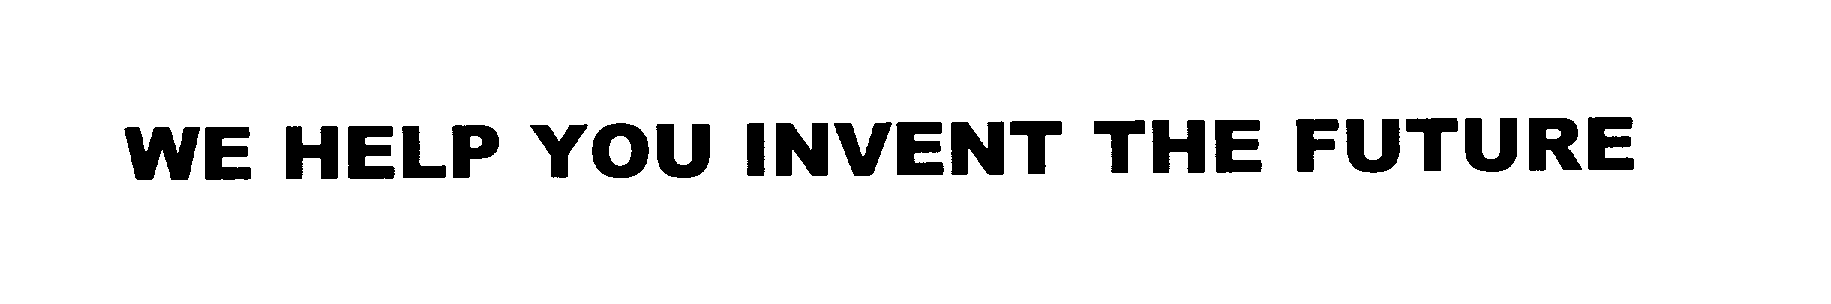  WE HELP YOU INVENT THE FUTURE